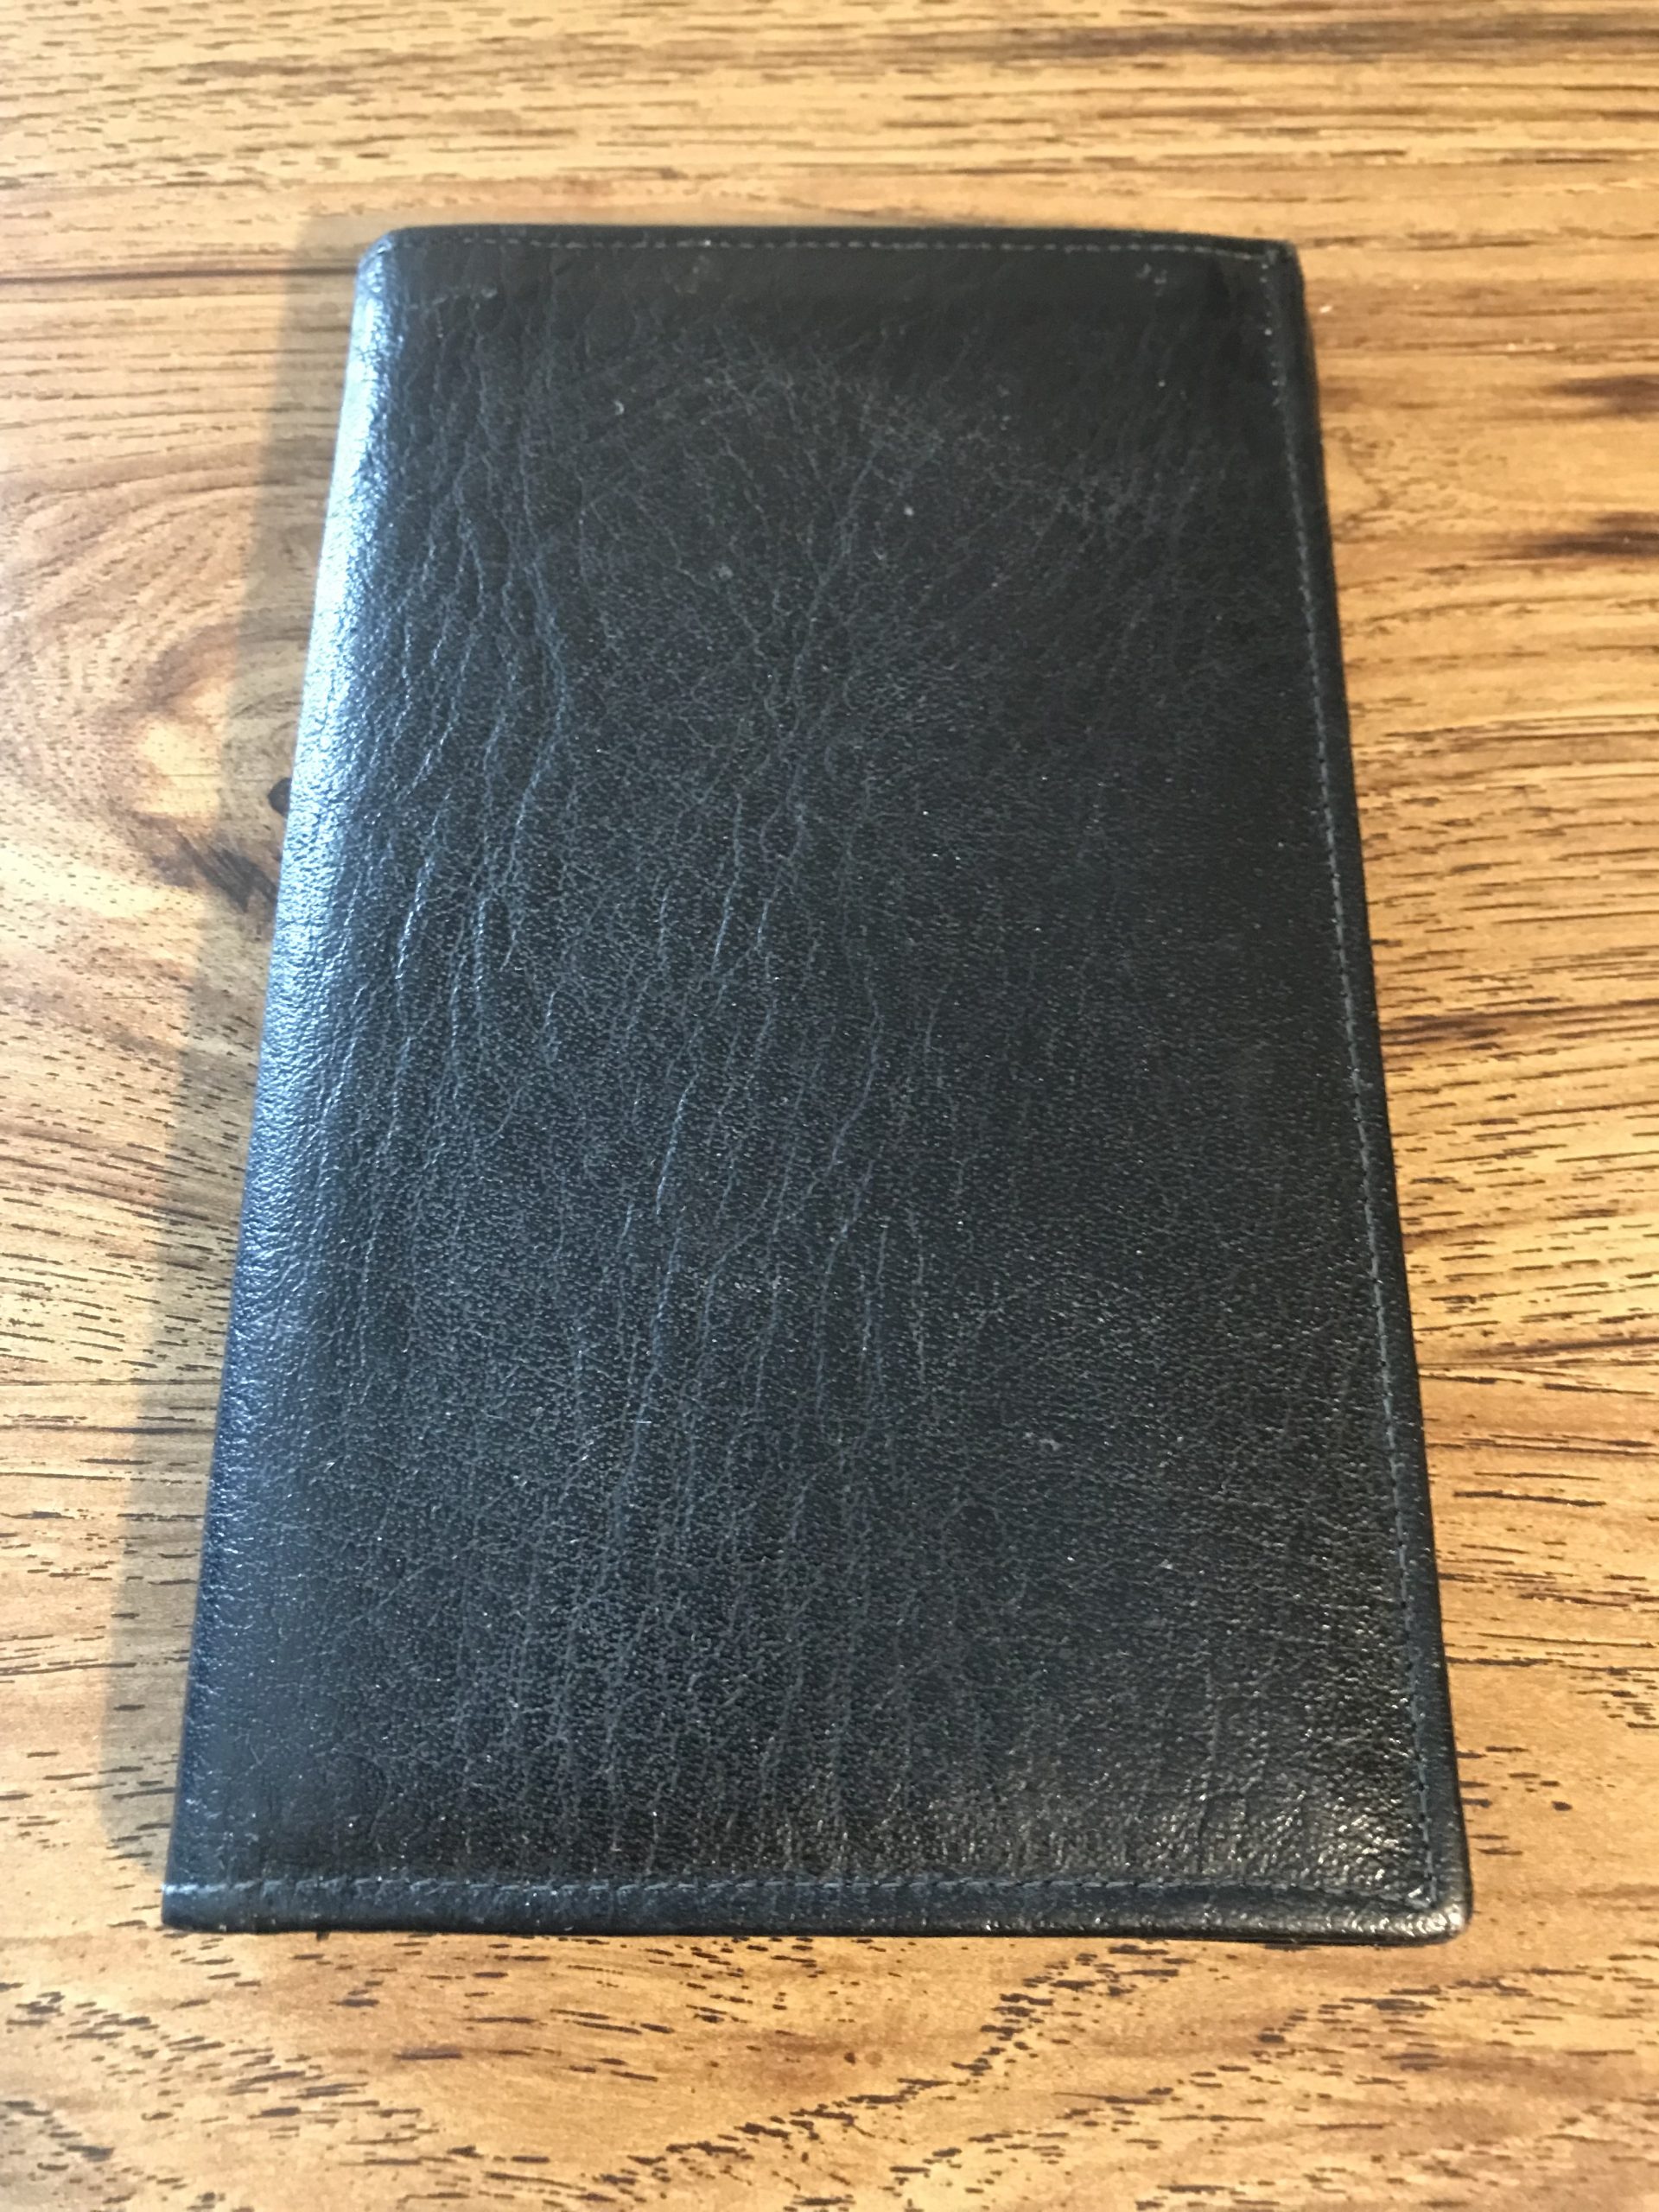 The LePaul "Card in Wallet" (Larry Jennings Version) by Lee Noble closed position